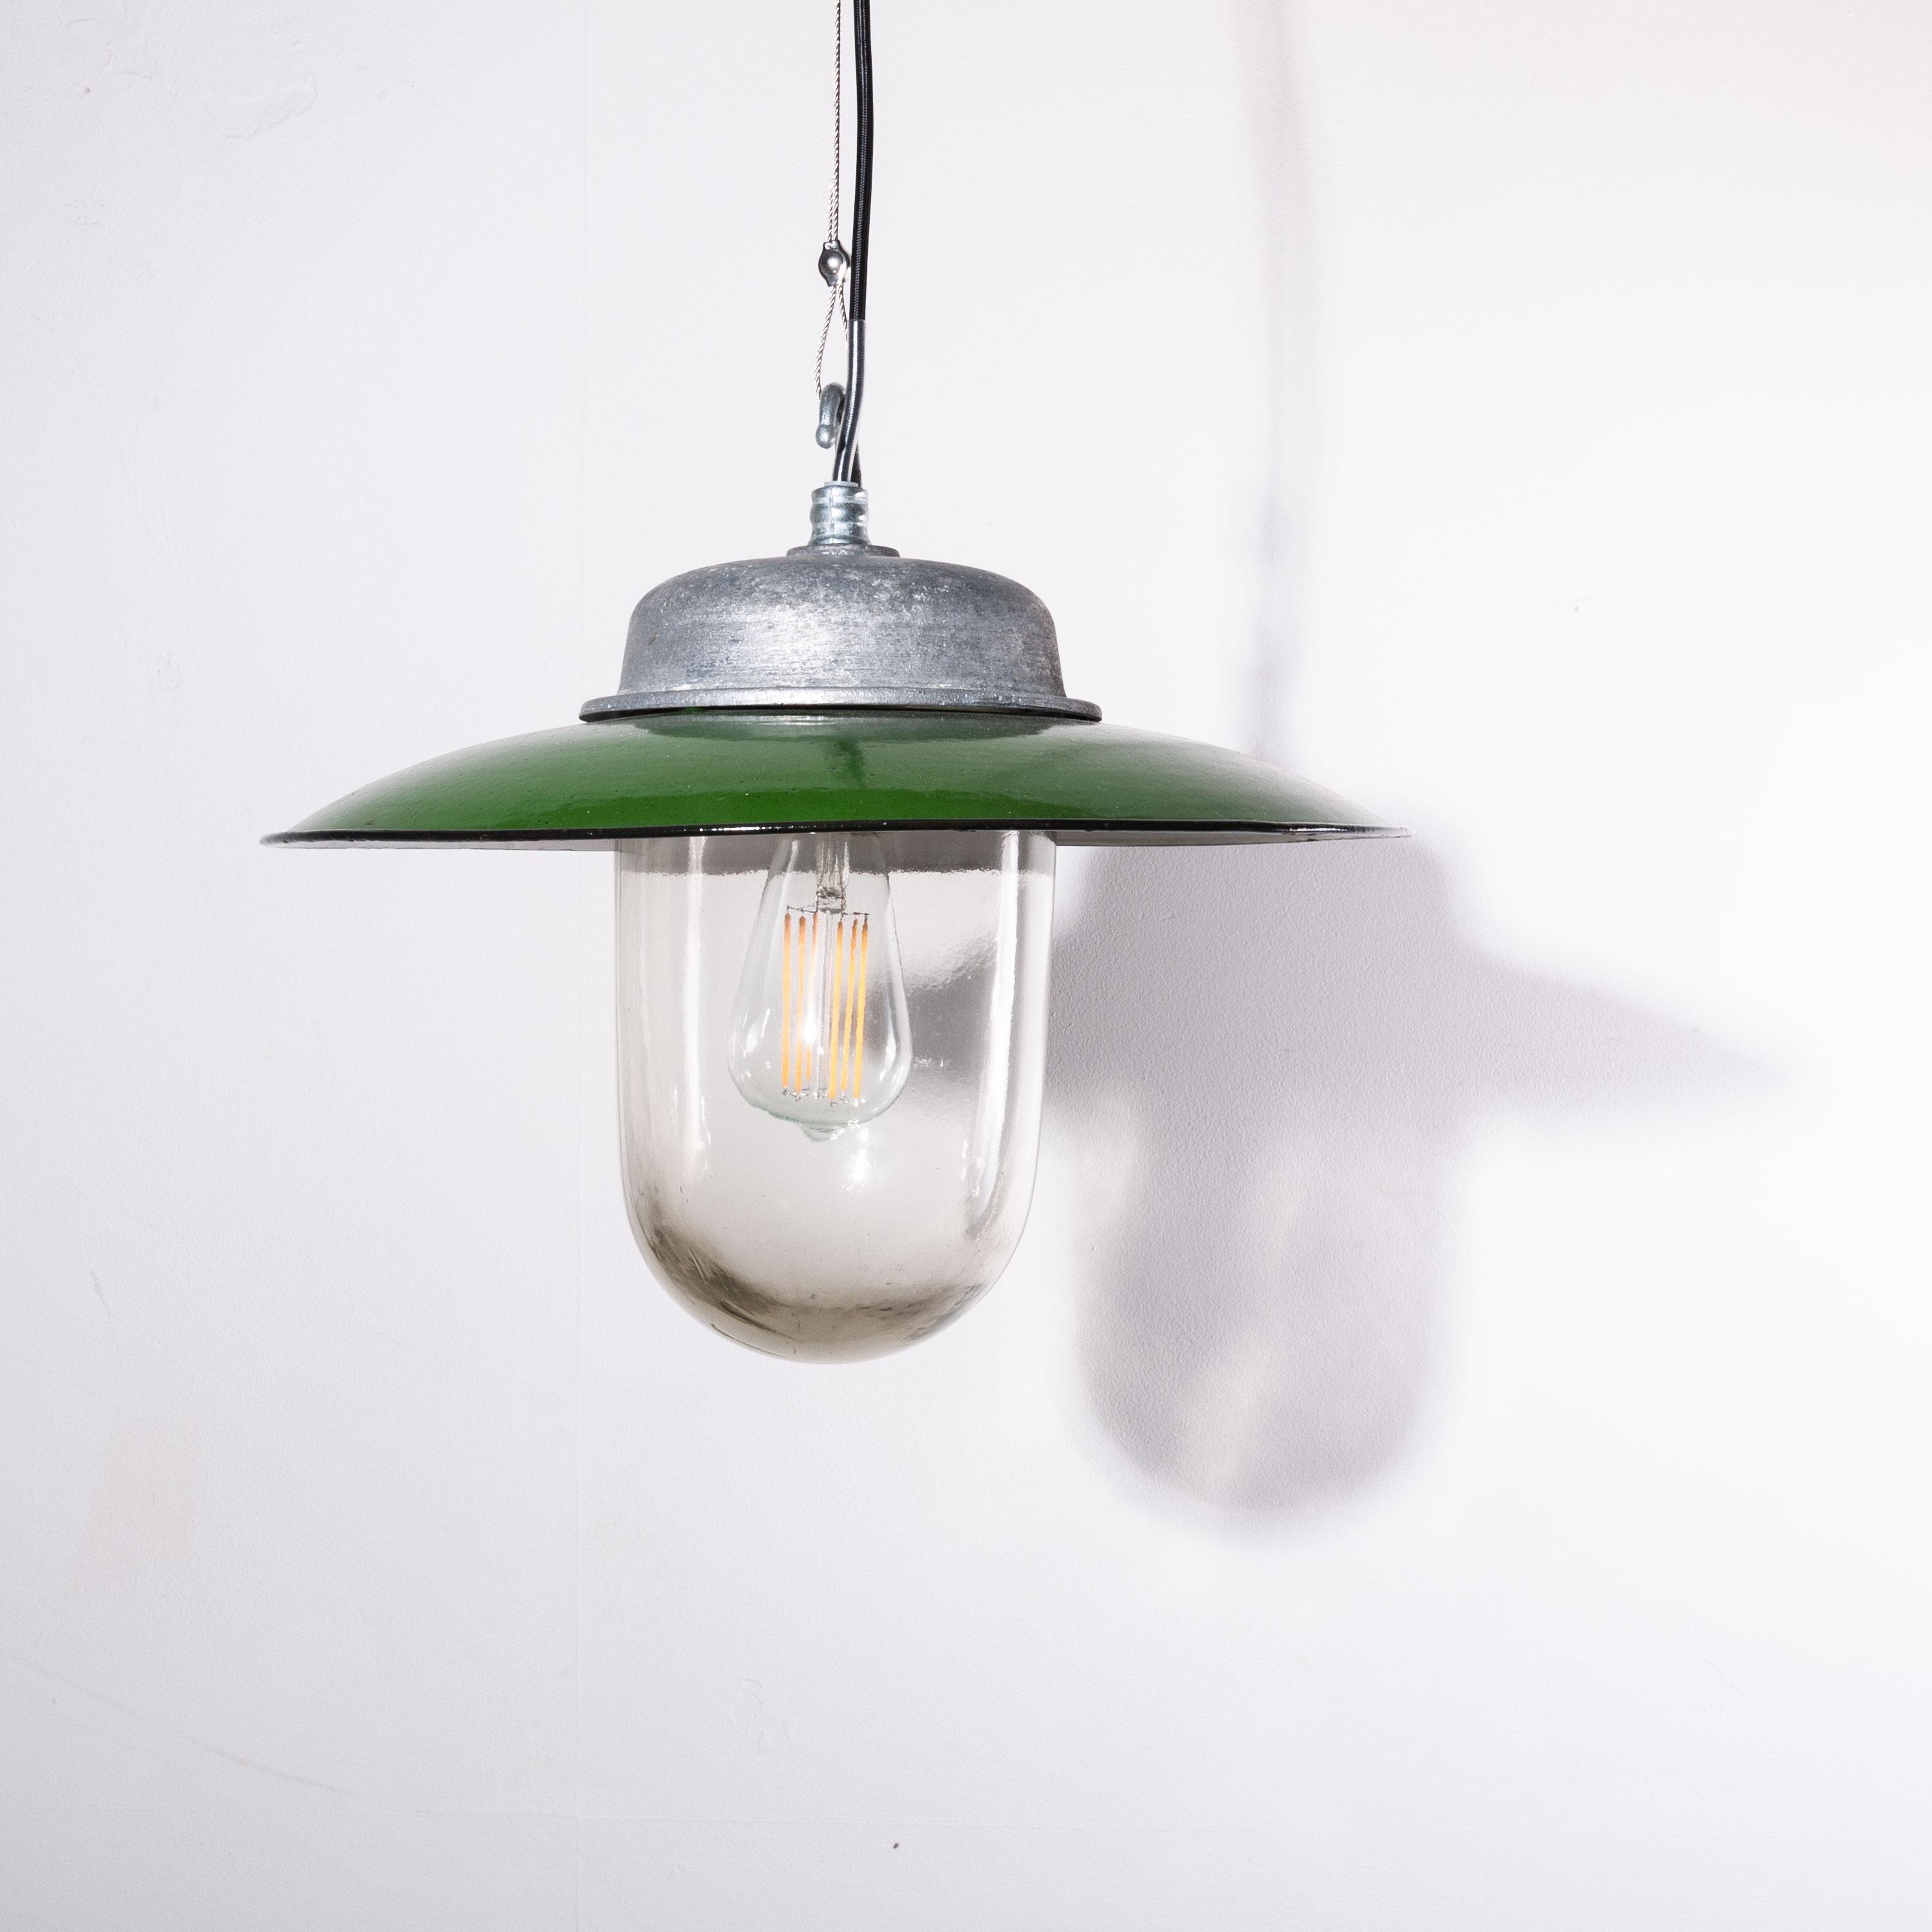 Mid-20th Century 1960s French Enamelled Ceiling Pendant Lamp/Light Shades with Original Glass